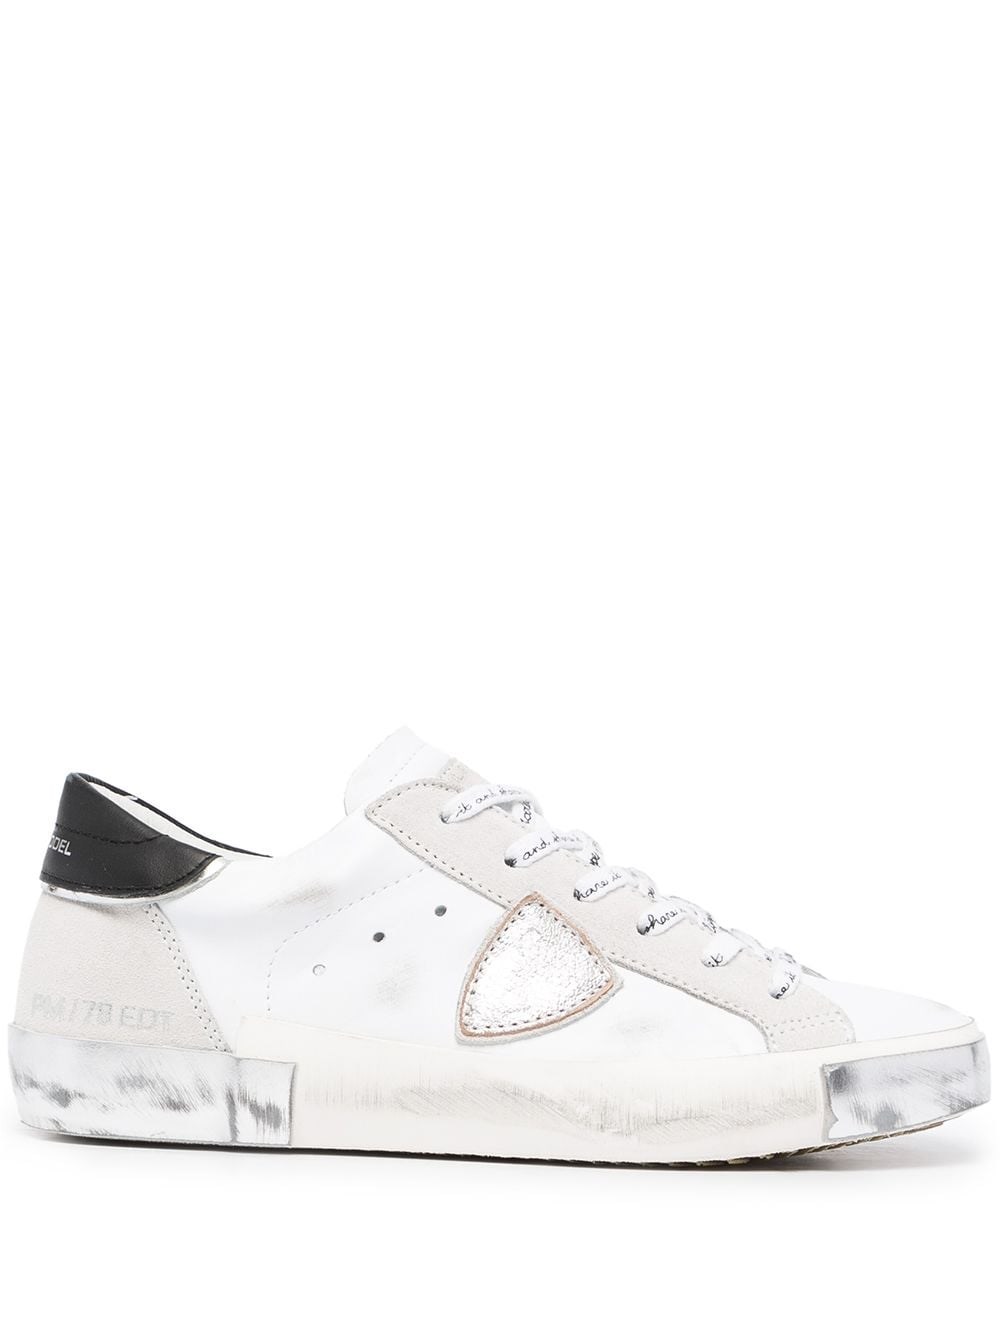 Philippe Model Prsx Trainers In Leather And Suede In White